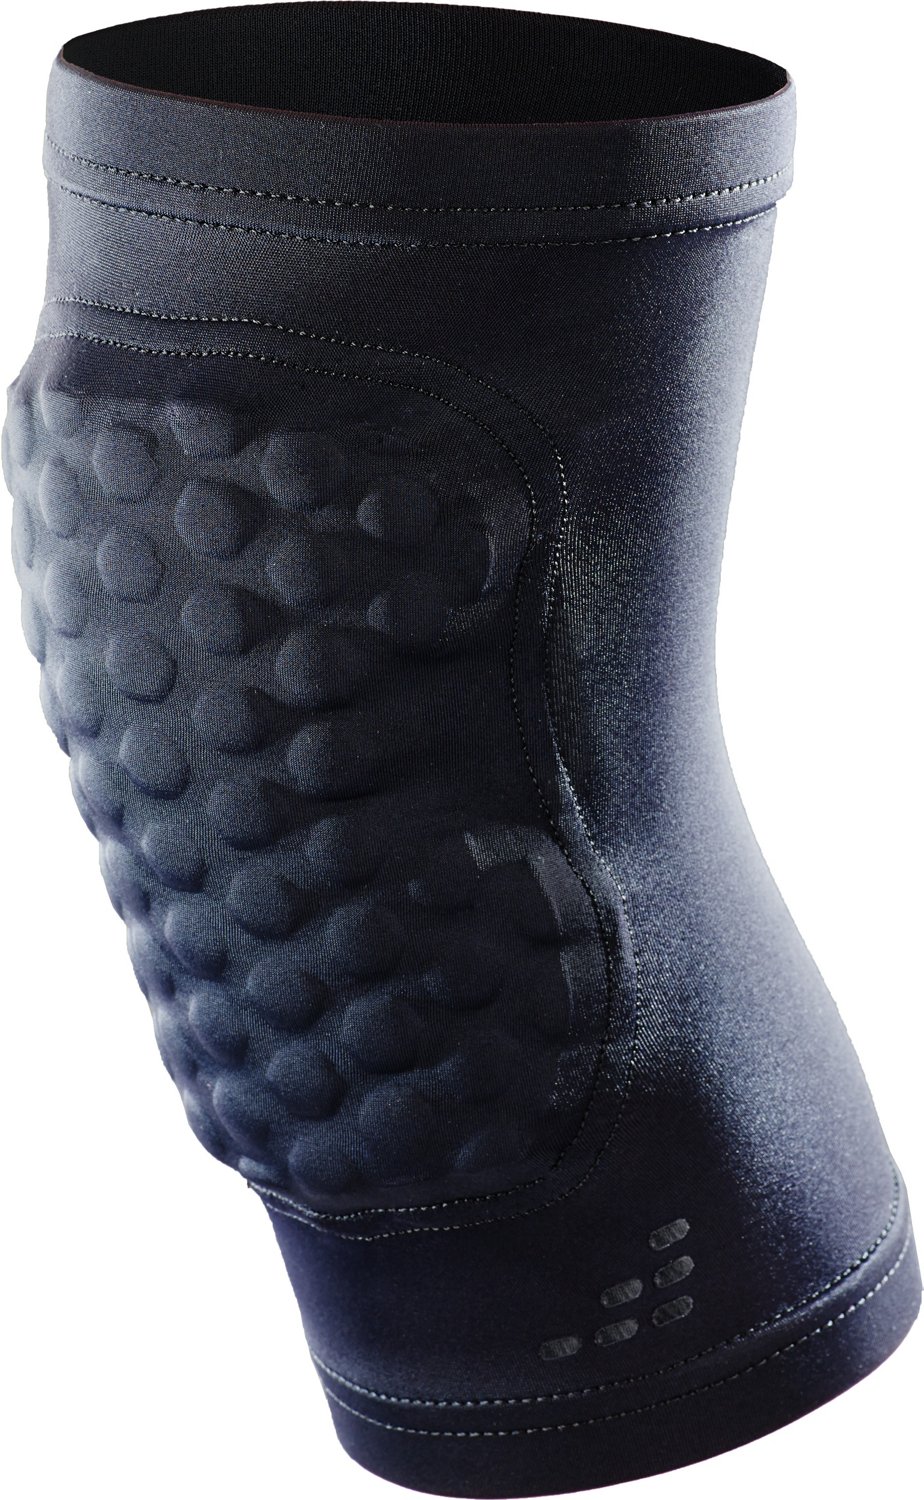 under armour knee pads basketball